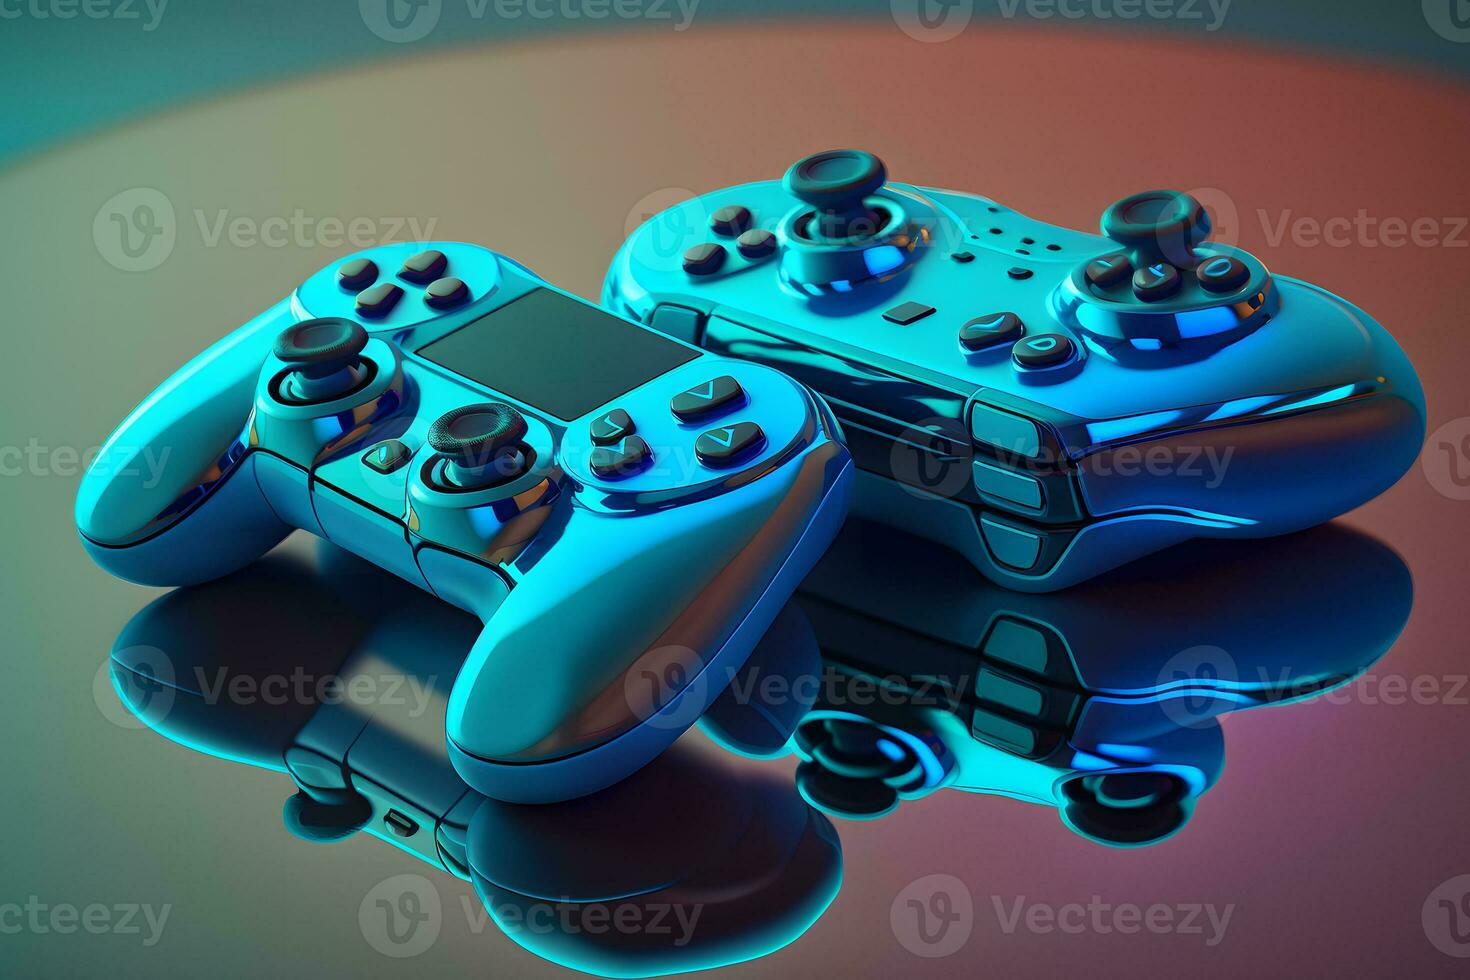 Two console gaming controllers with many buttons and glossy shiny body surface. Neural network generated art photo